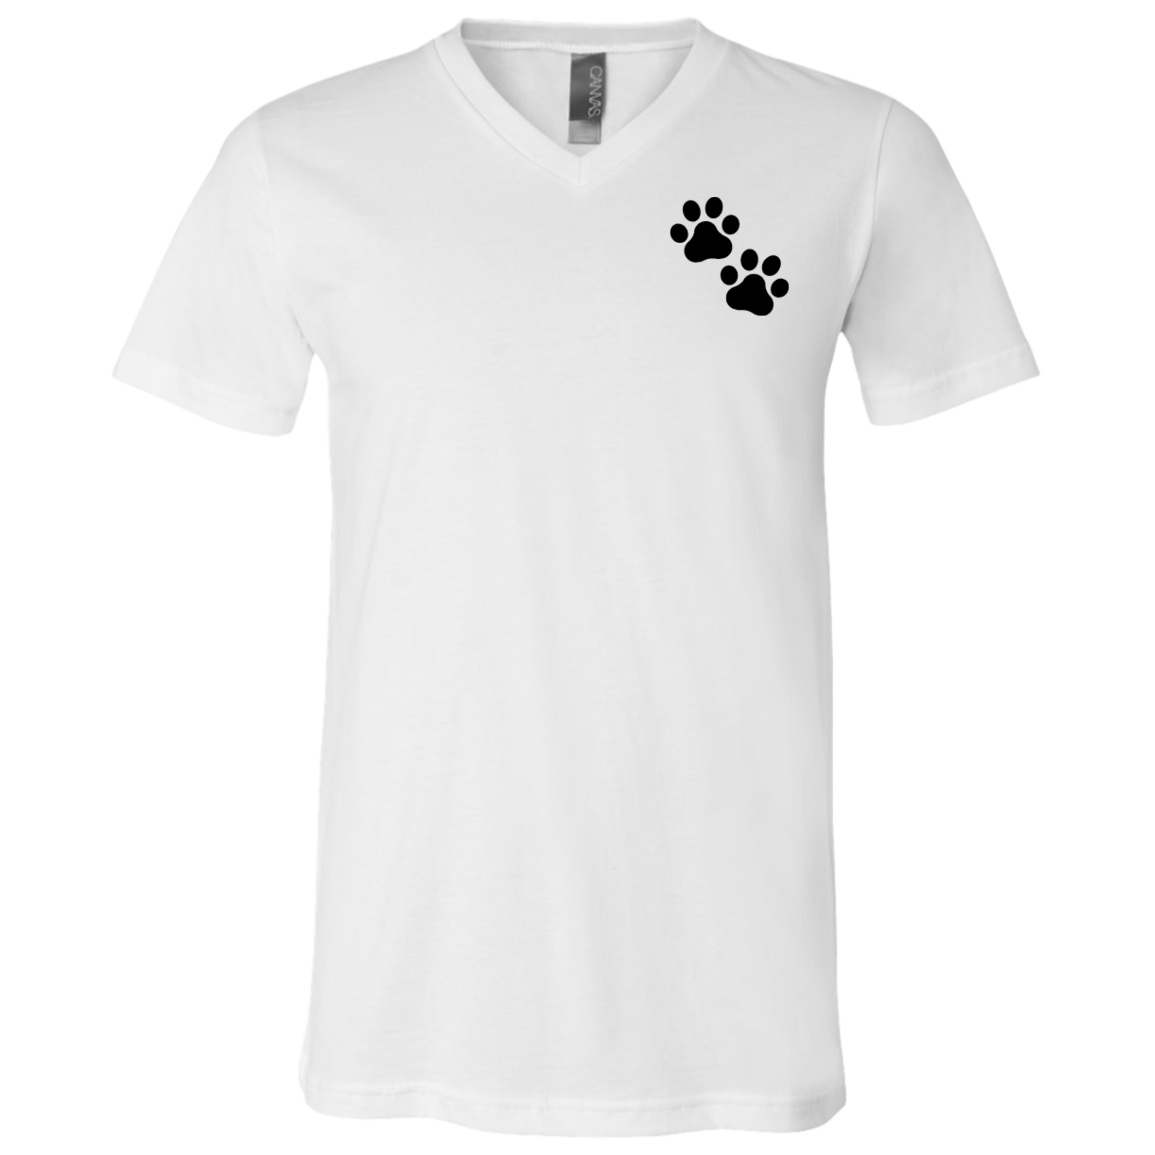 Paw to hold Men's Jersey SS V-Neck T-Shirt